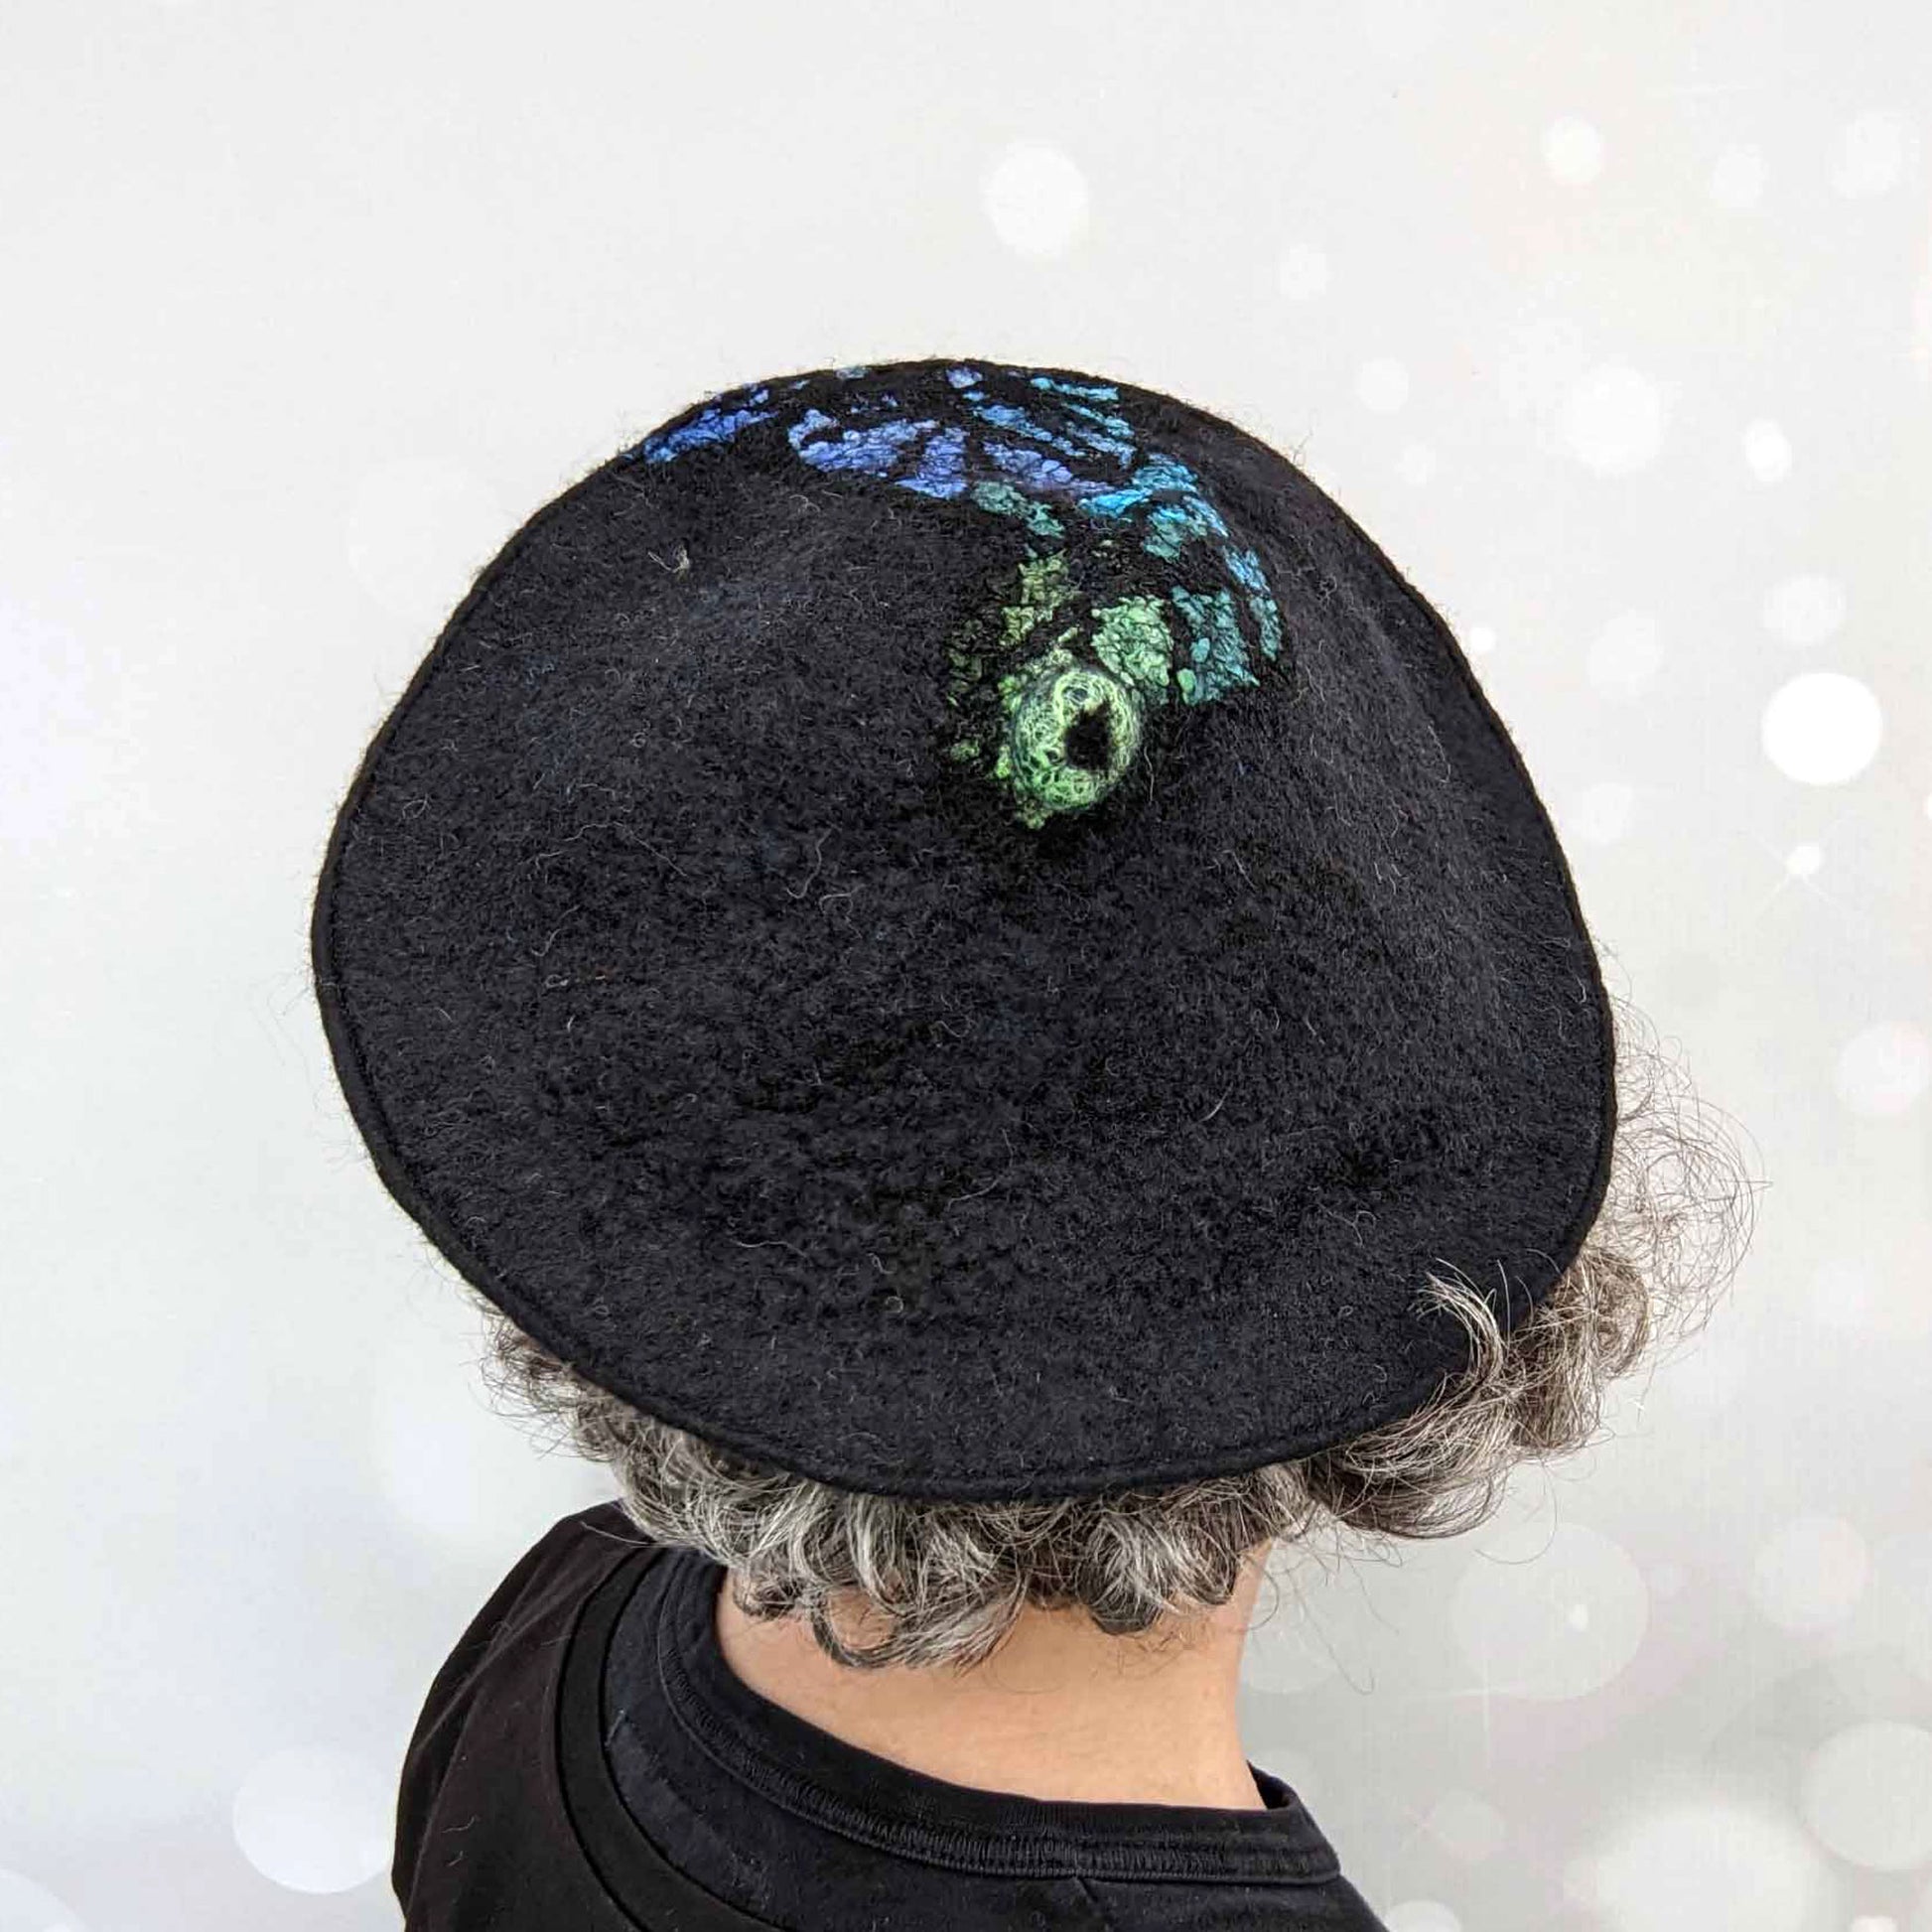 Stained Glass Inspired Felted Black Beret with Cool Colored Swirl - backview